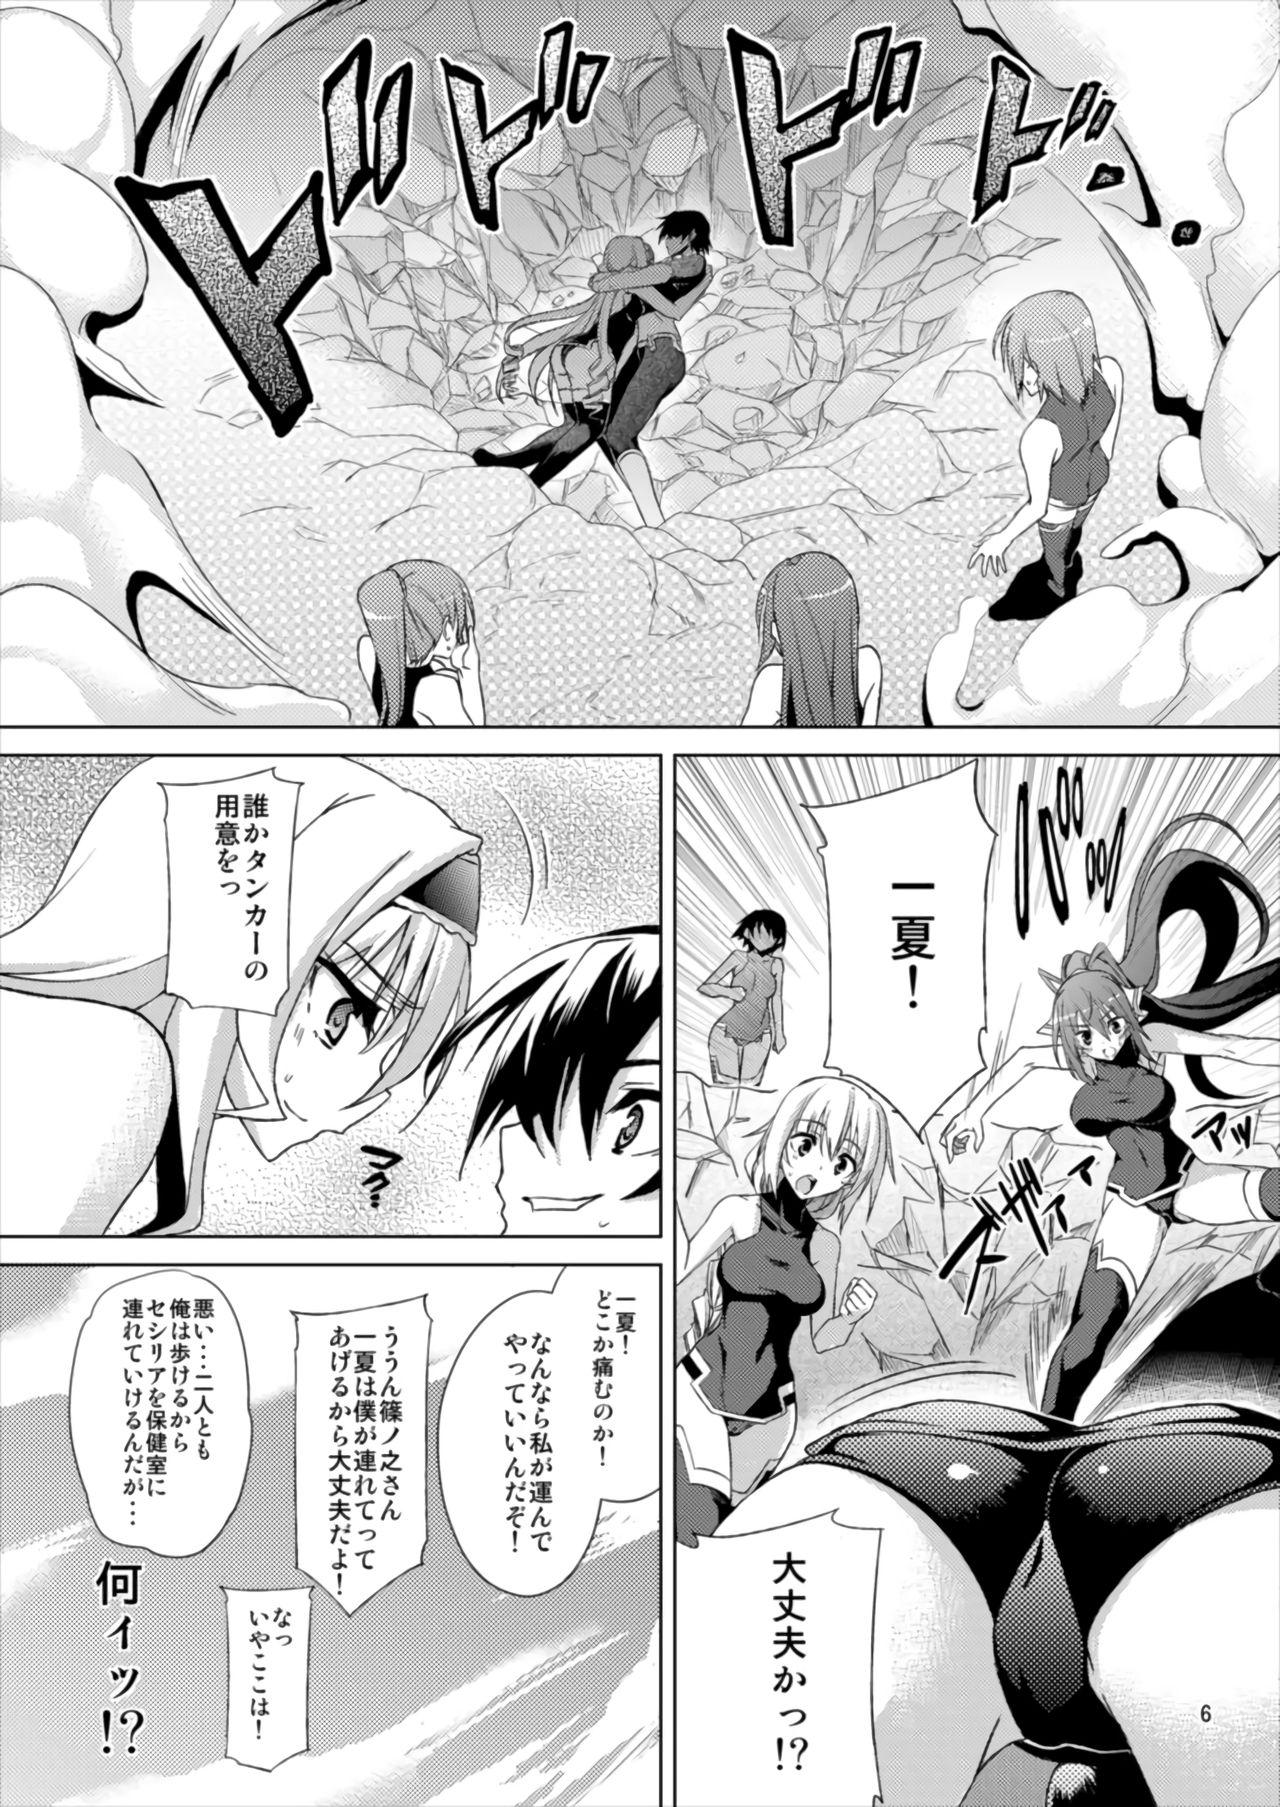 Petite Teen AFTER DREAM - Infinite stratos Slim - Page 6